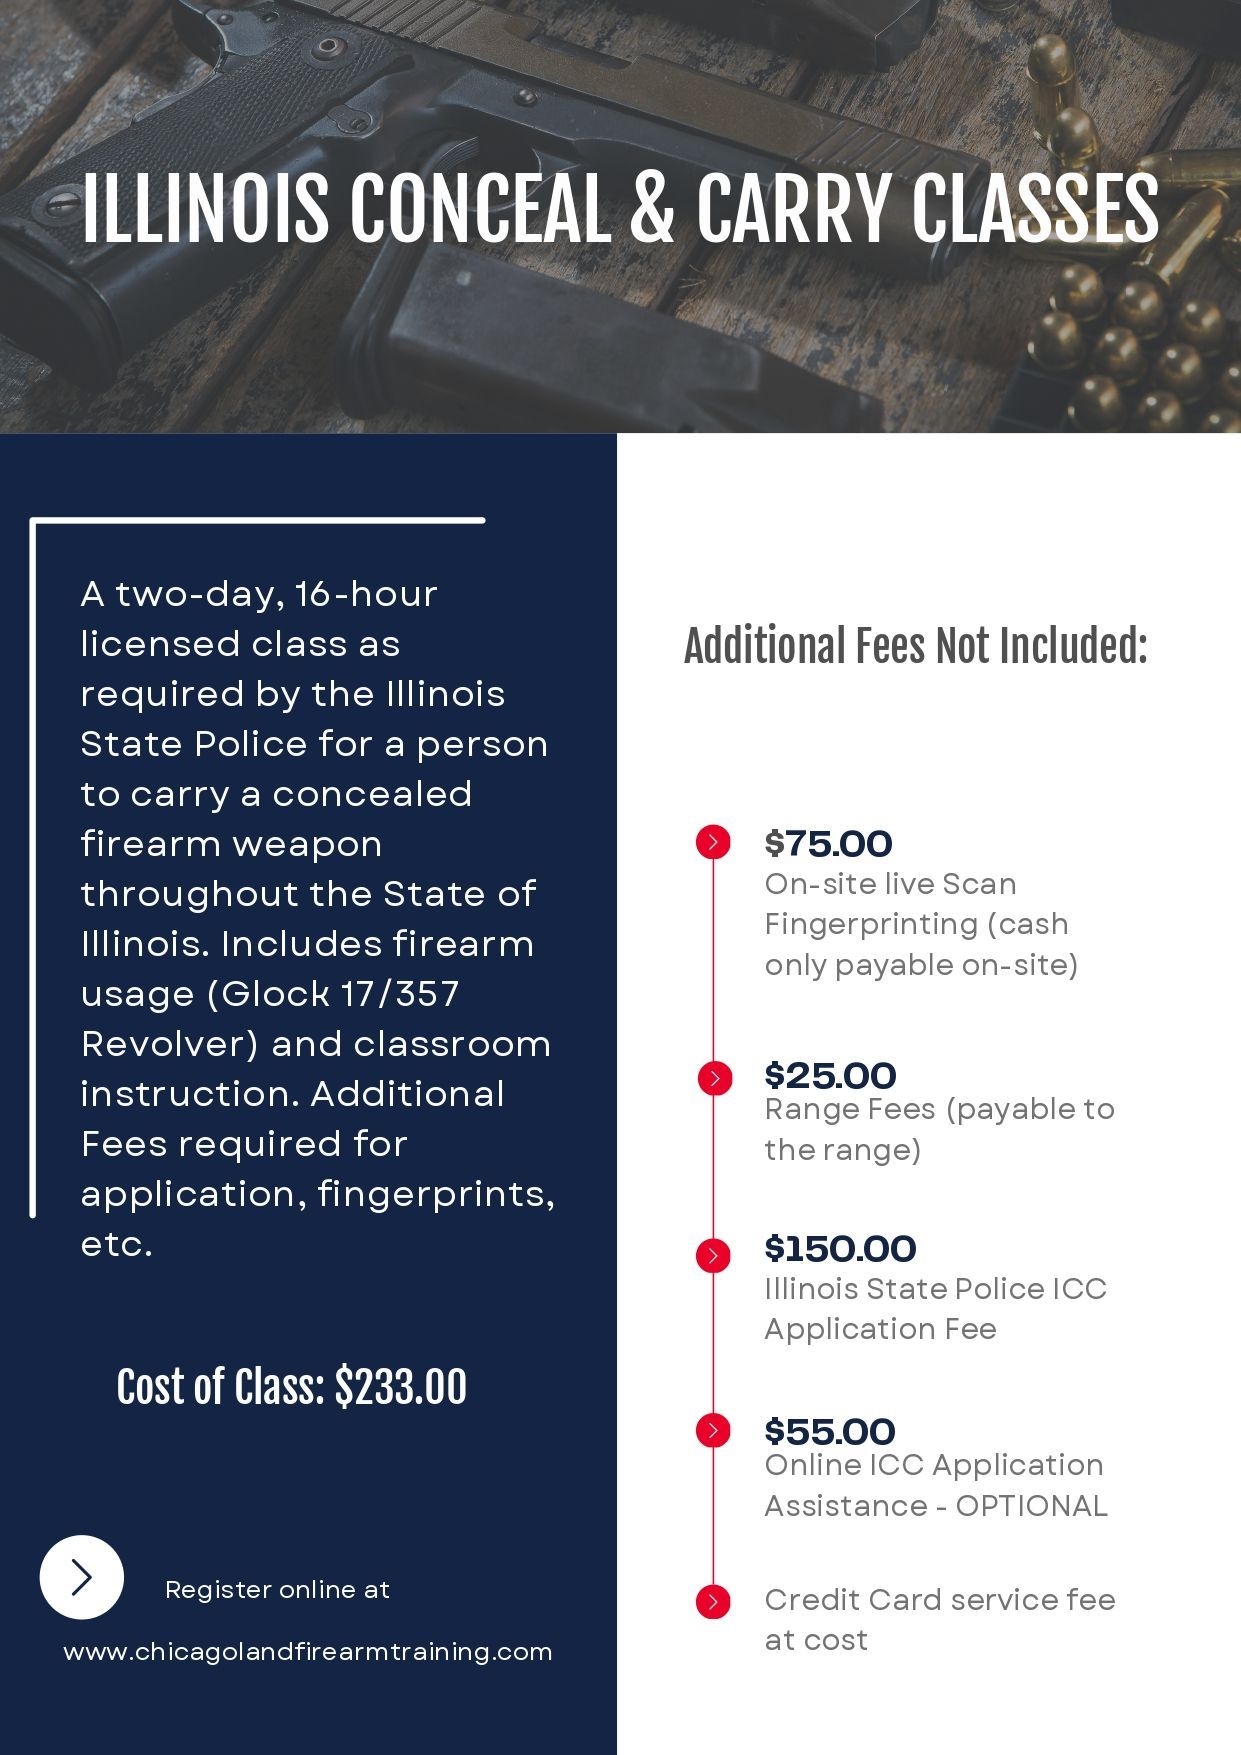 an advertisement for illinois conceal and carry classes